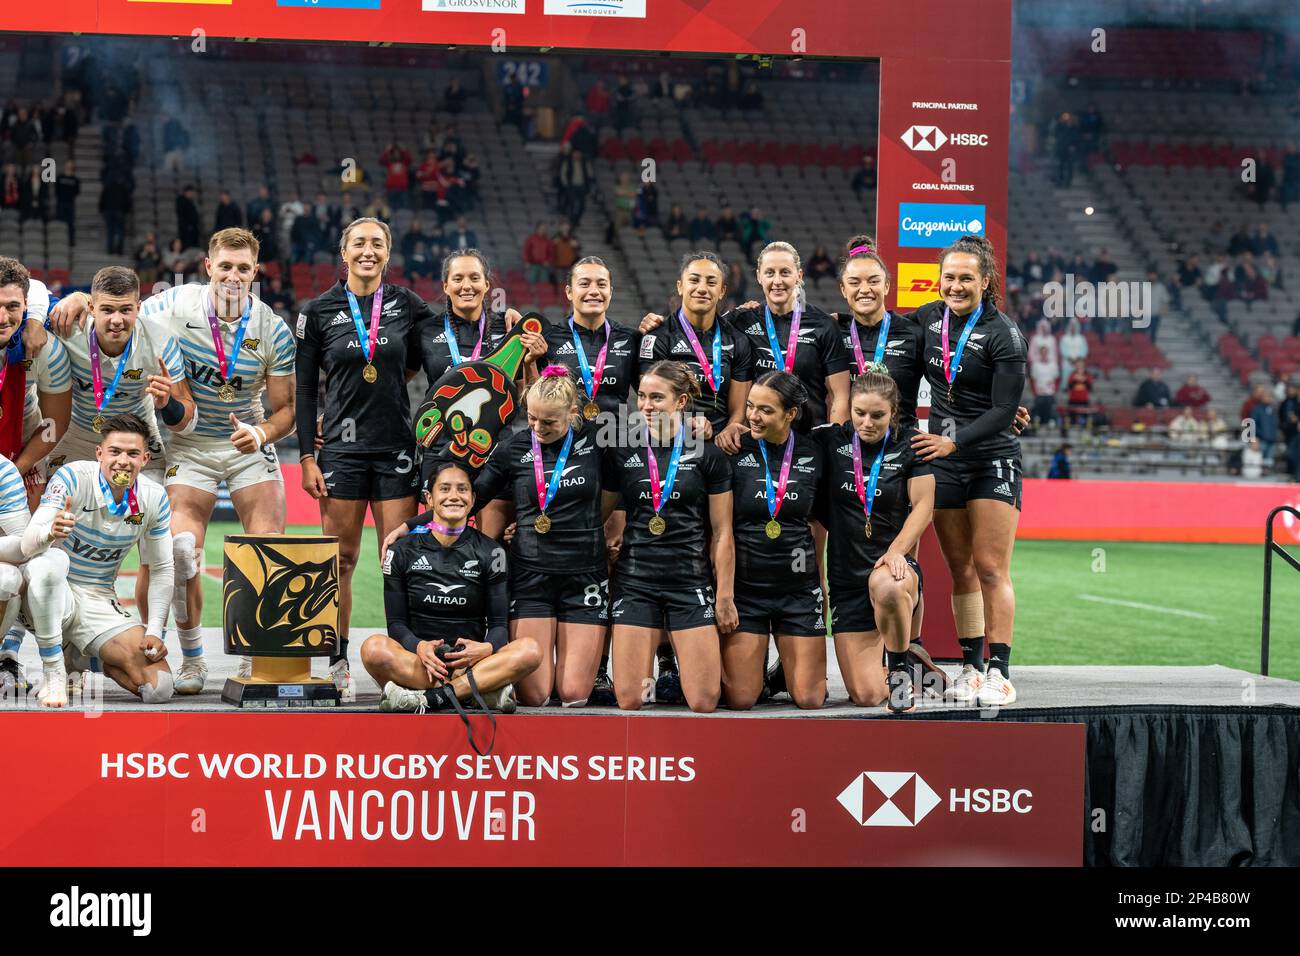 Vancouver, Canada. 5th March, 2023. Womens Gold medallists New Zealand's players pose on the podium during the annual HSBC World Rugby Sevens Series tournament at BC Place in Vancouver, Canada. Credit: Joe Ng/Alamy Live News. Stock Photo